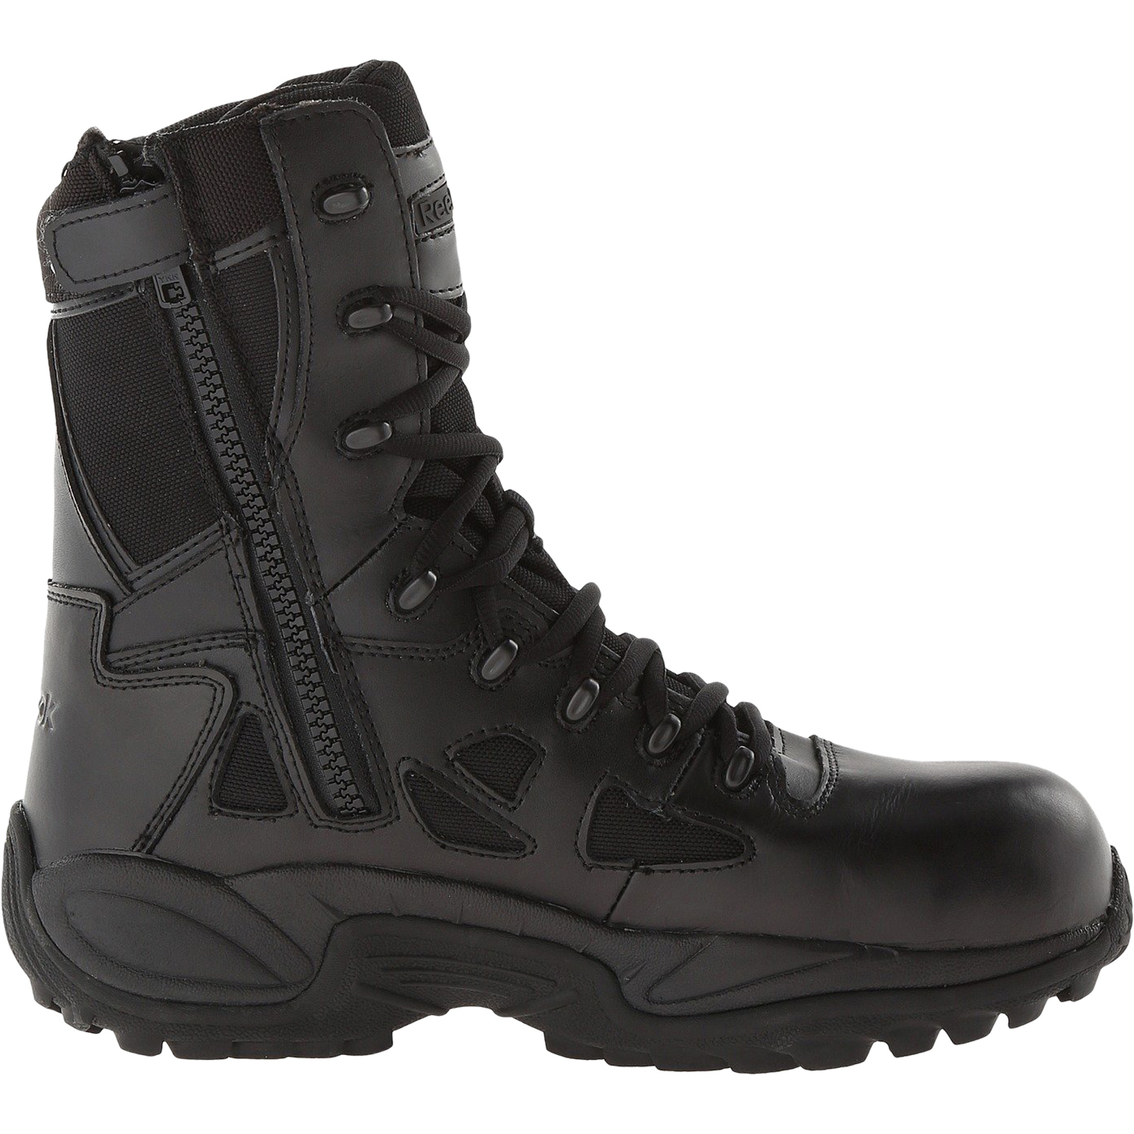 Reebok Rapid Response RB8874 Boots - Image 2 of 7